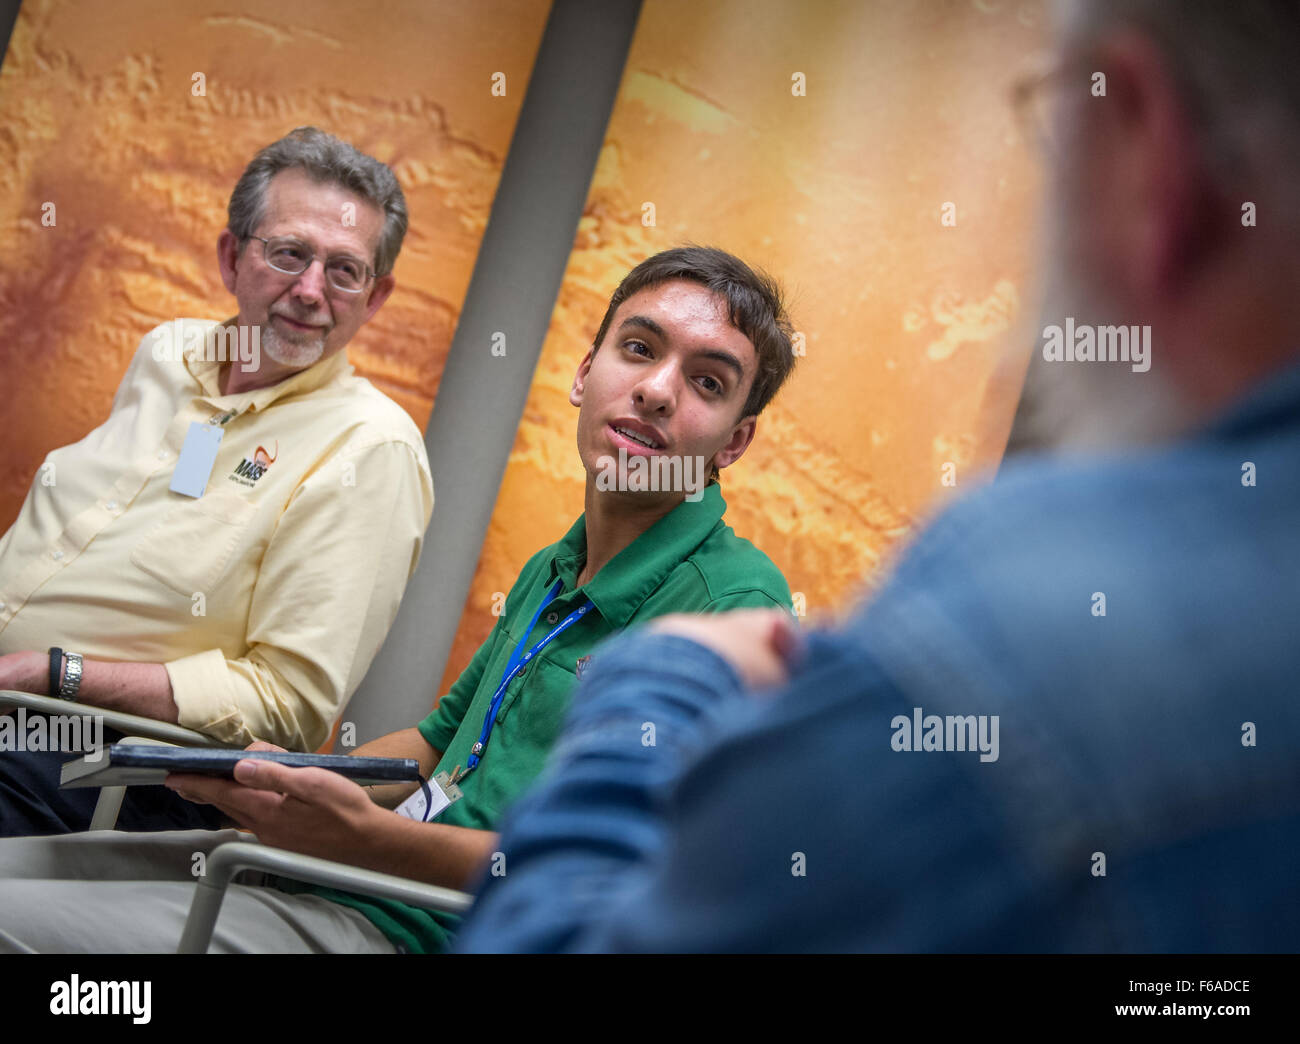 Alex Longo, a 15-year old student from Cardinal Gibbons High School, answers reporter's questions as Jim Green, director of the Planetary Science Division at NASA Headquarters looks on following the First Landing Site/Exploration Zone Workshop for Human Missions to the Surface of Mars held at the Lunar and Planetary Institute, Friday, Oct. 30, 2015, in Houston, Texas. The agency is hosting the workshop to collect proposals for locations on Mars that would be of high scientific research value while also providing natural resources to enable human explorers to land, live and work safely on the R Stock Photo